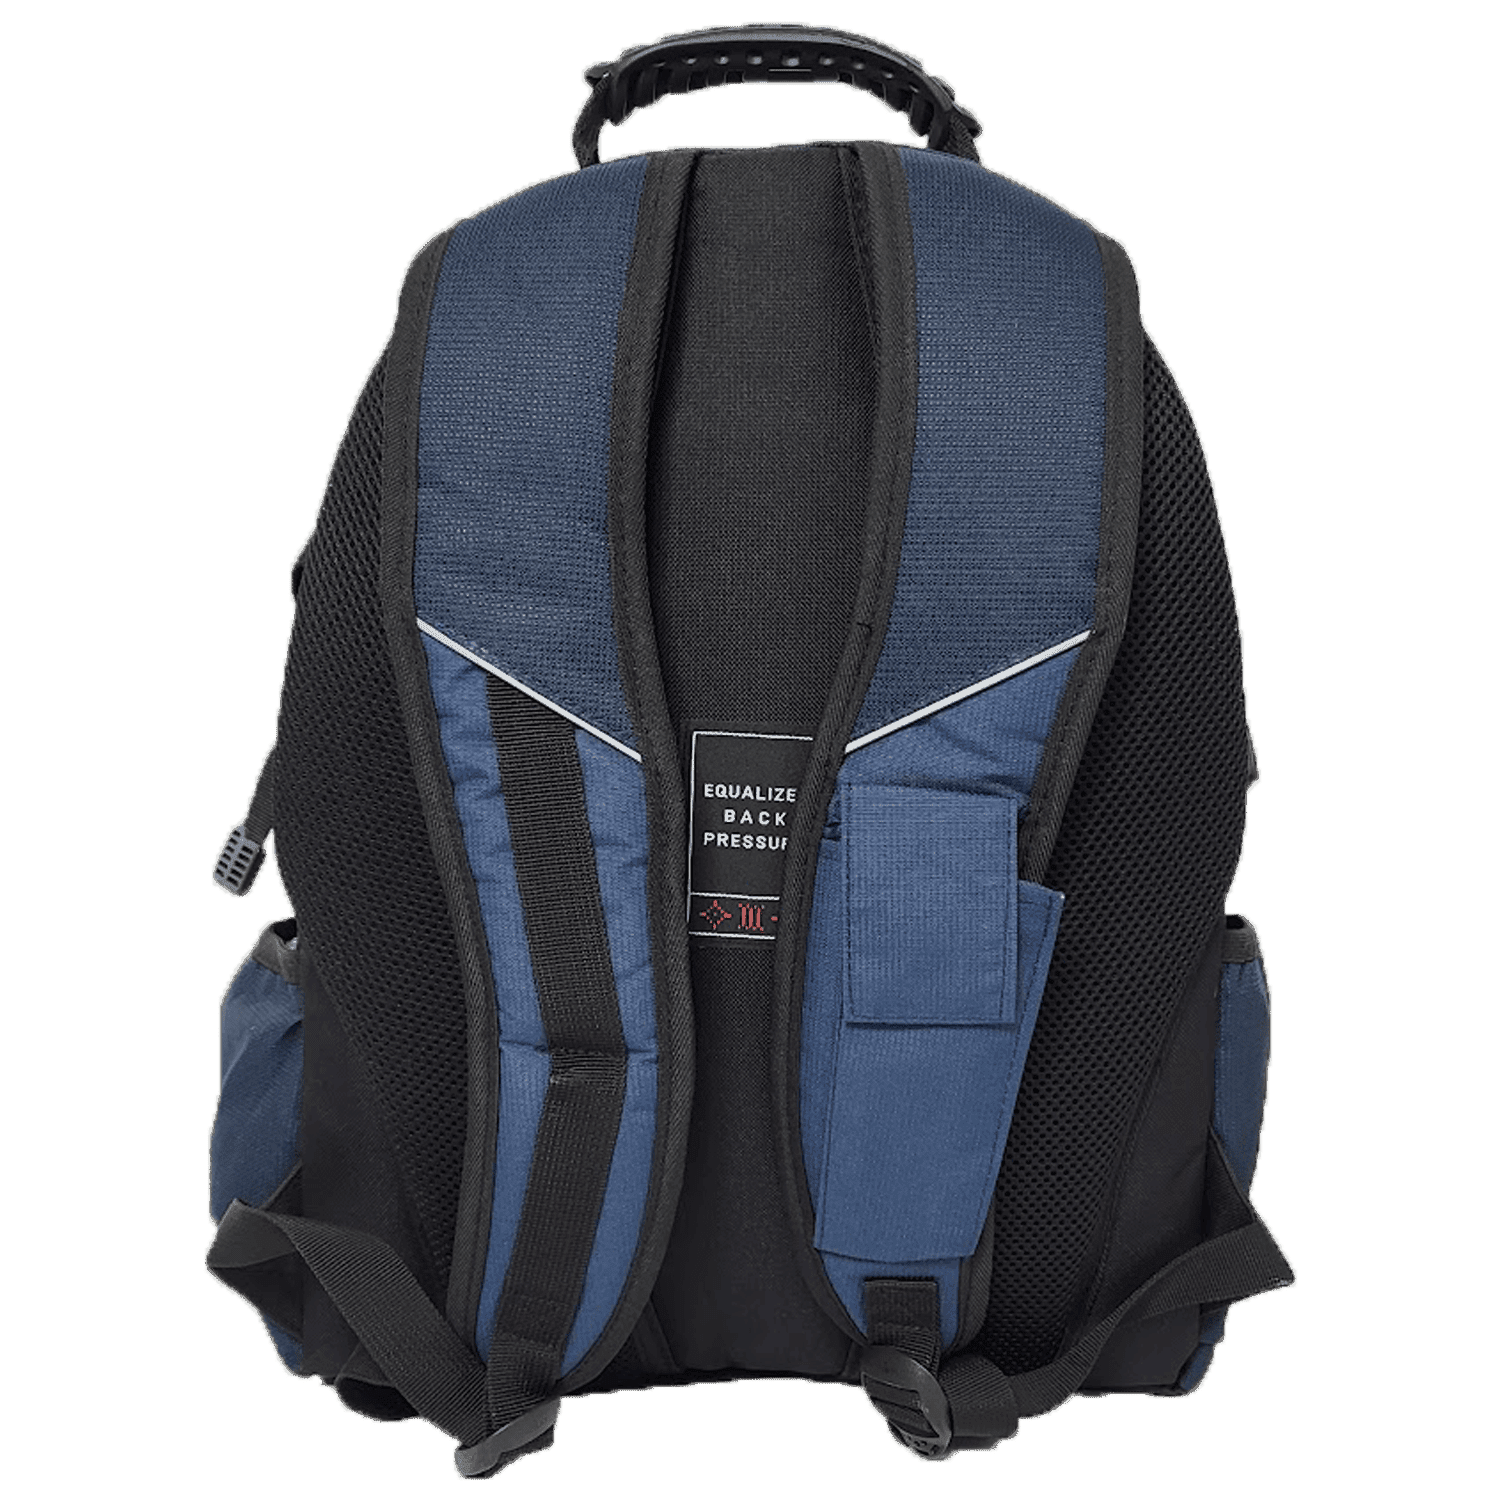 Sportech Ridge 53 – Bolton Backpack - Navy 4 Shaws Department Stores